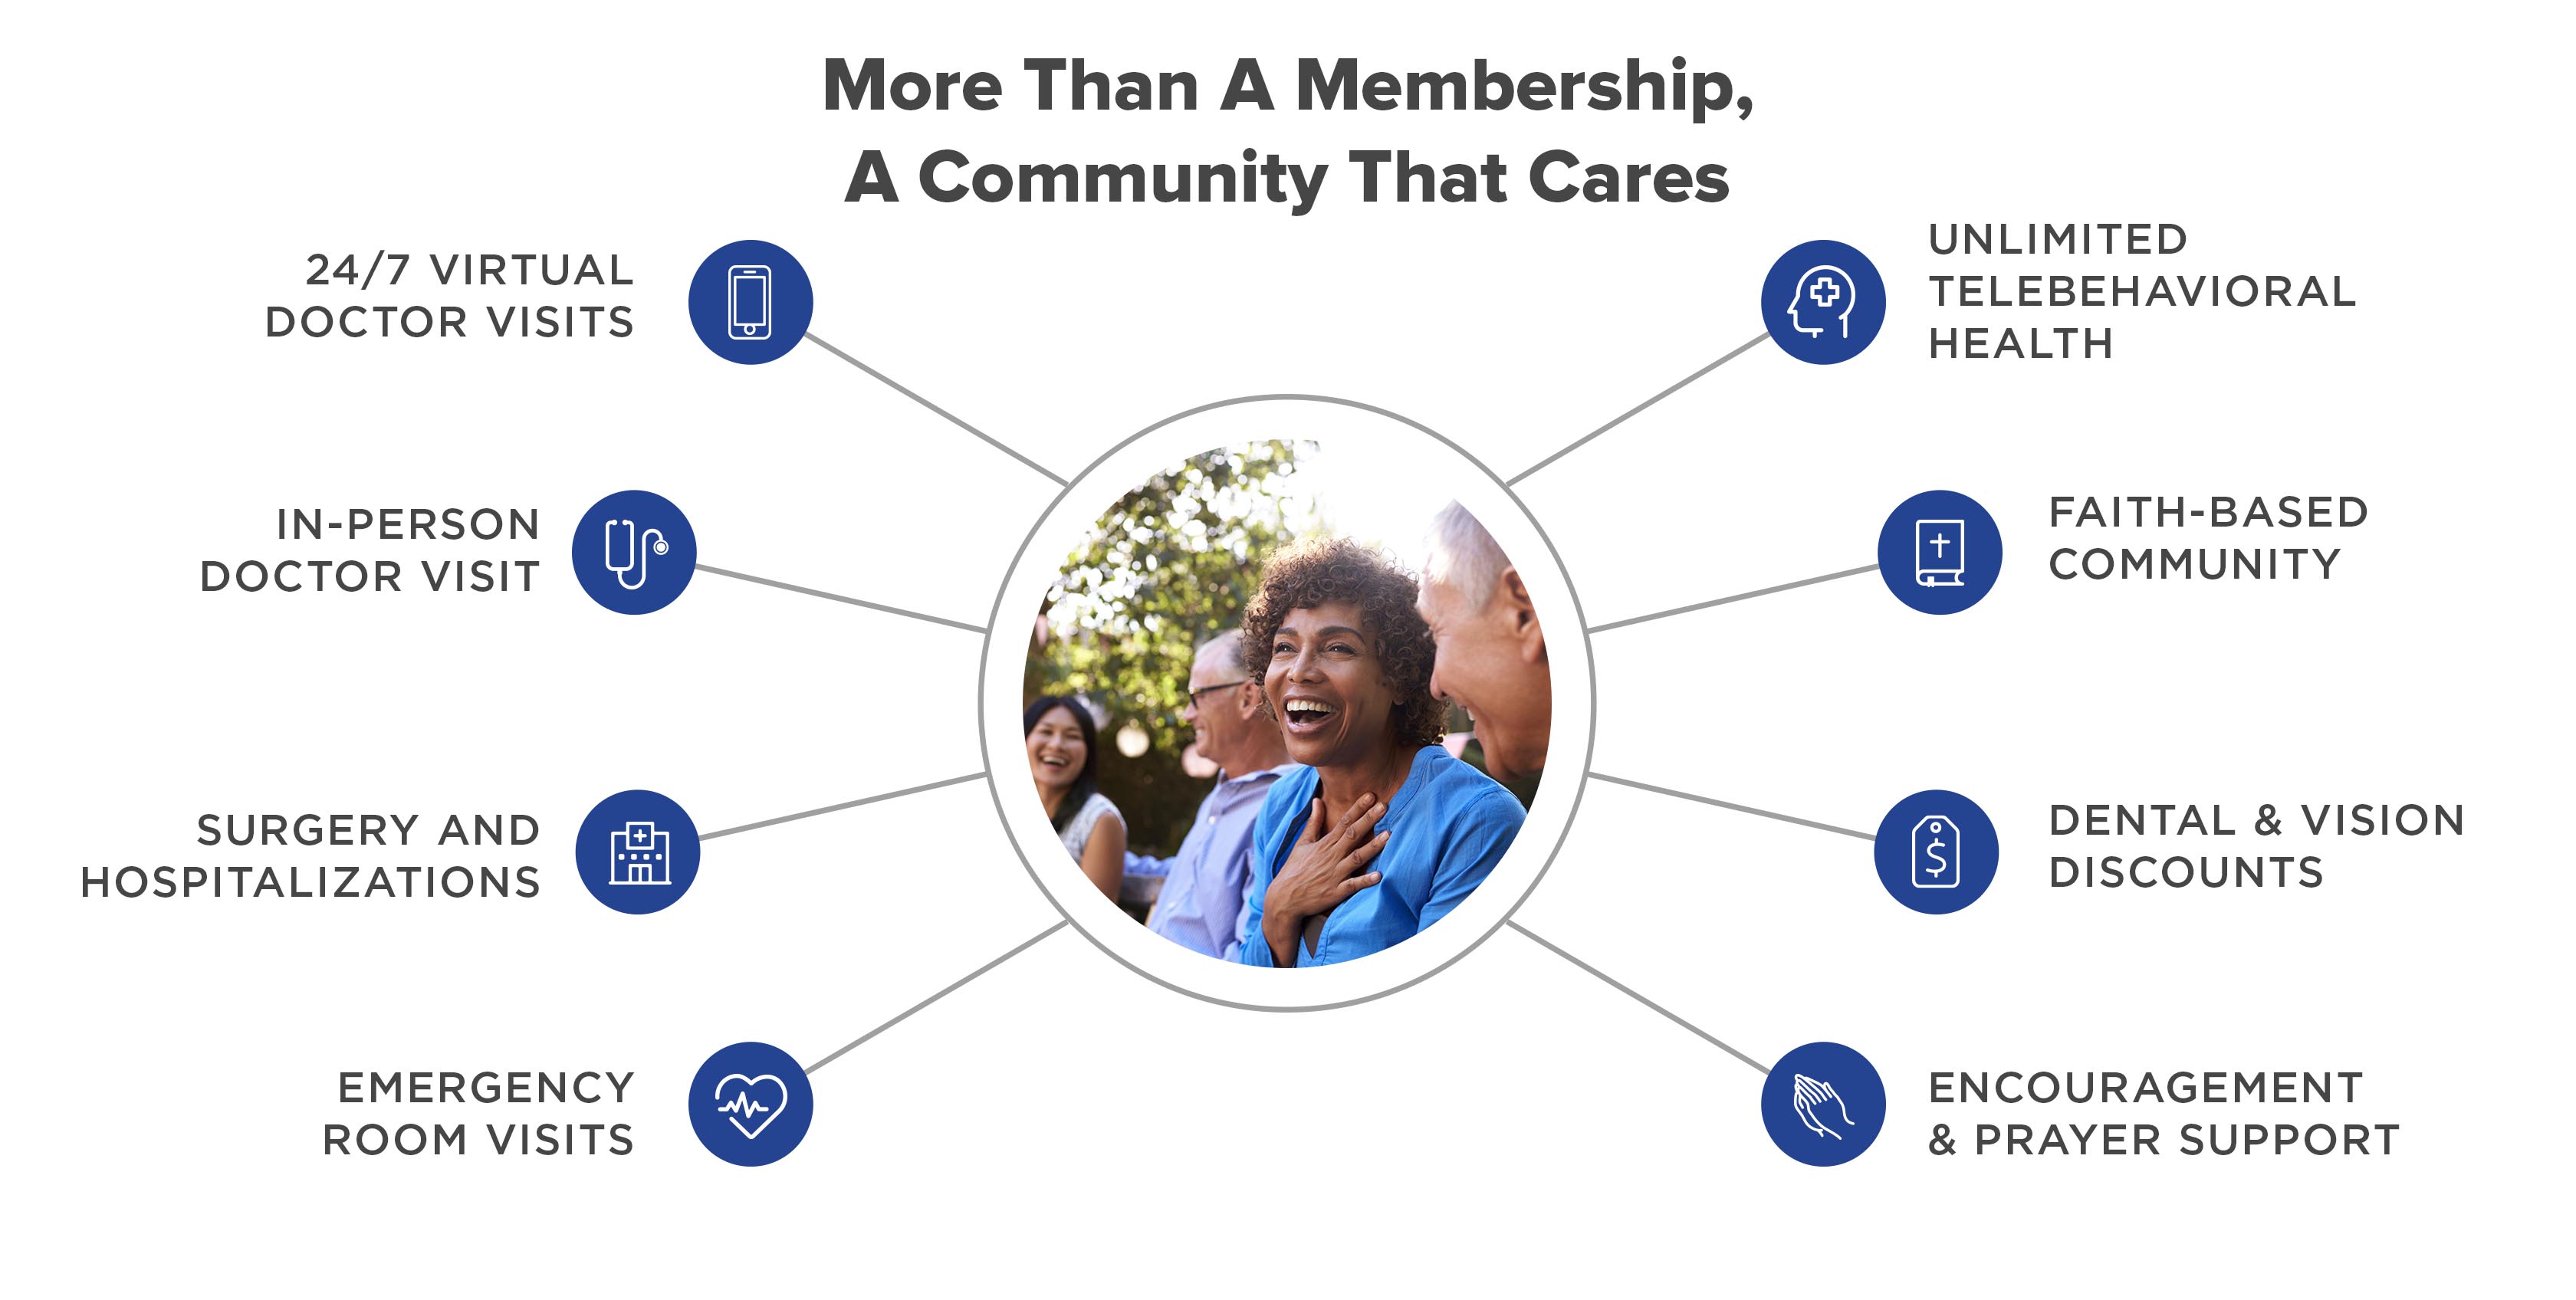 More than a membership, a community that cares. 